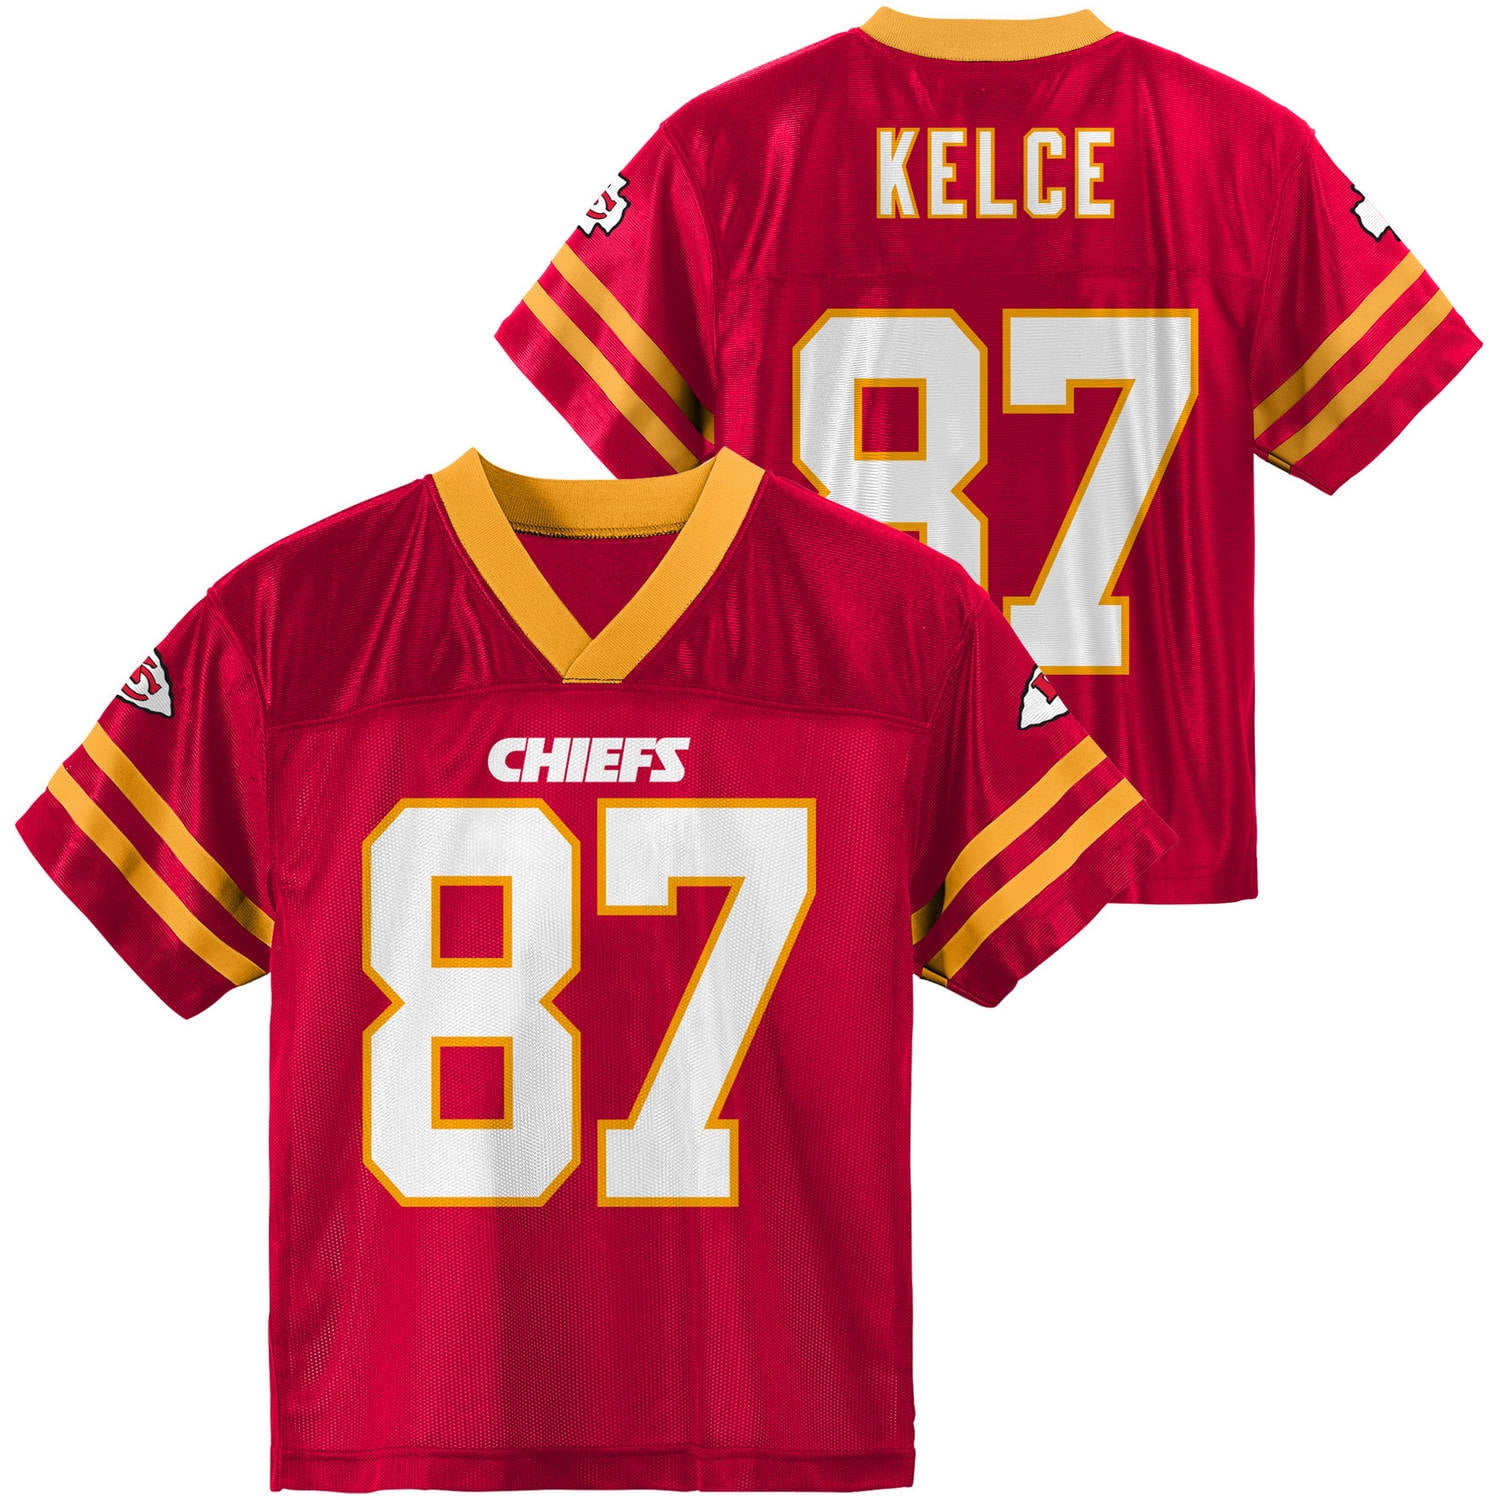 NFL, Player T Kelce, Kansas City Chiefs, YOUTH Player Jersey, Size 4